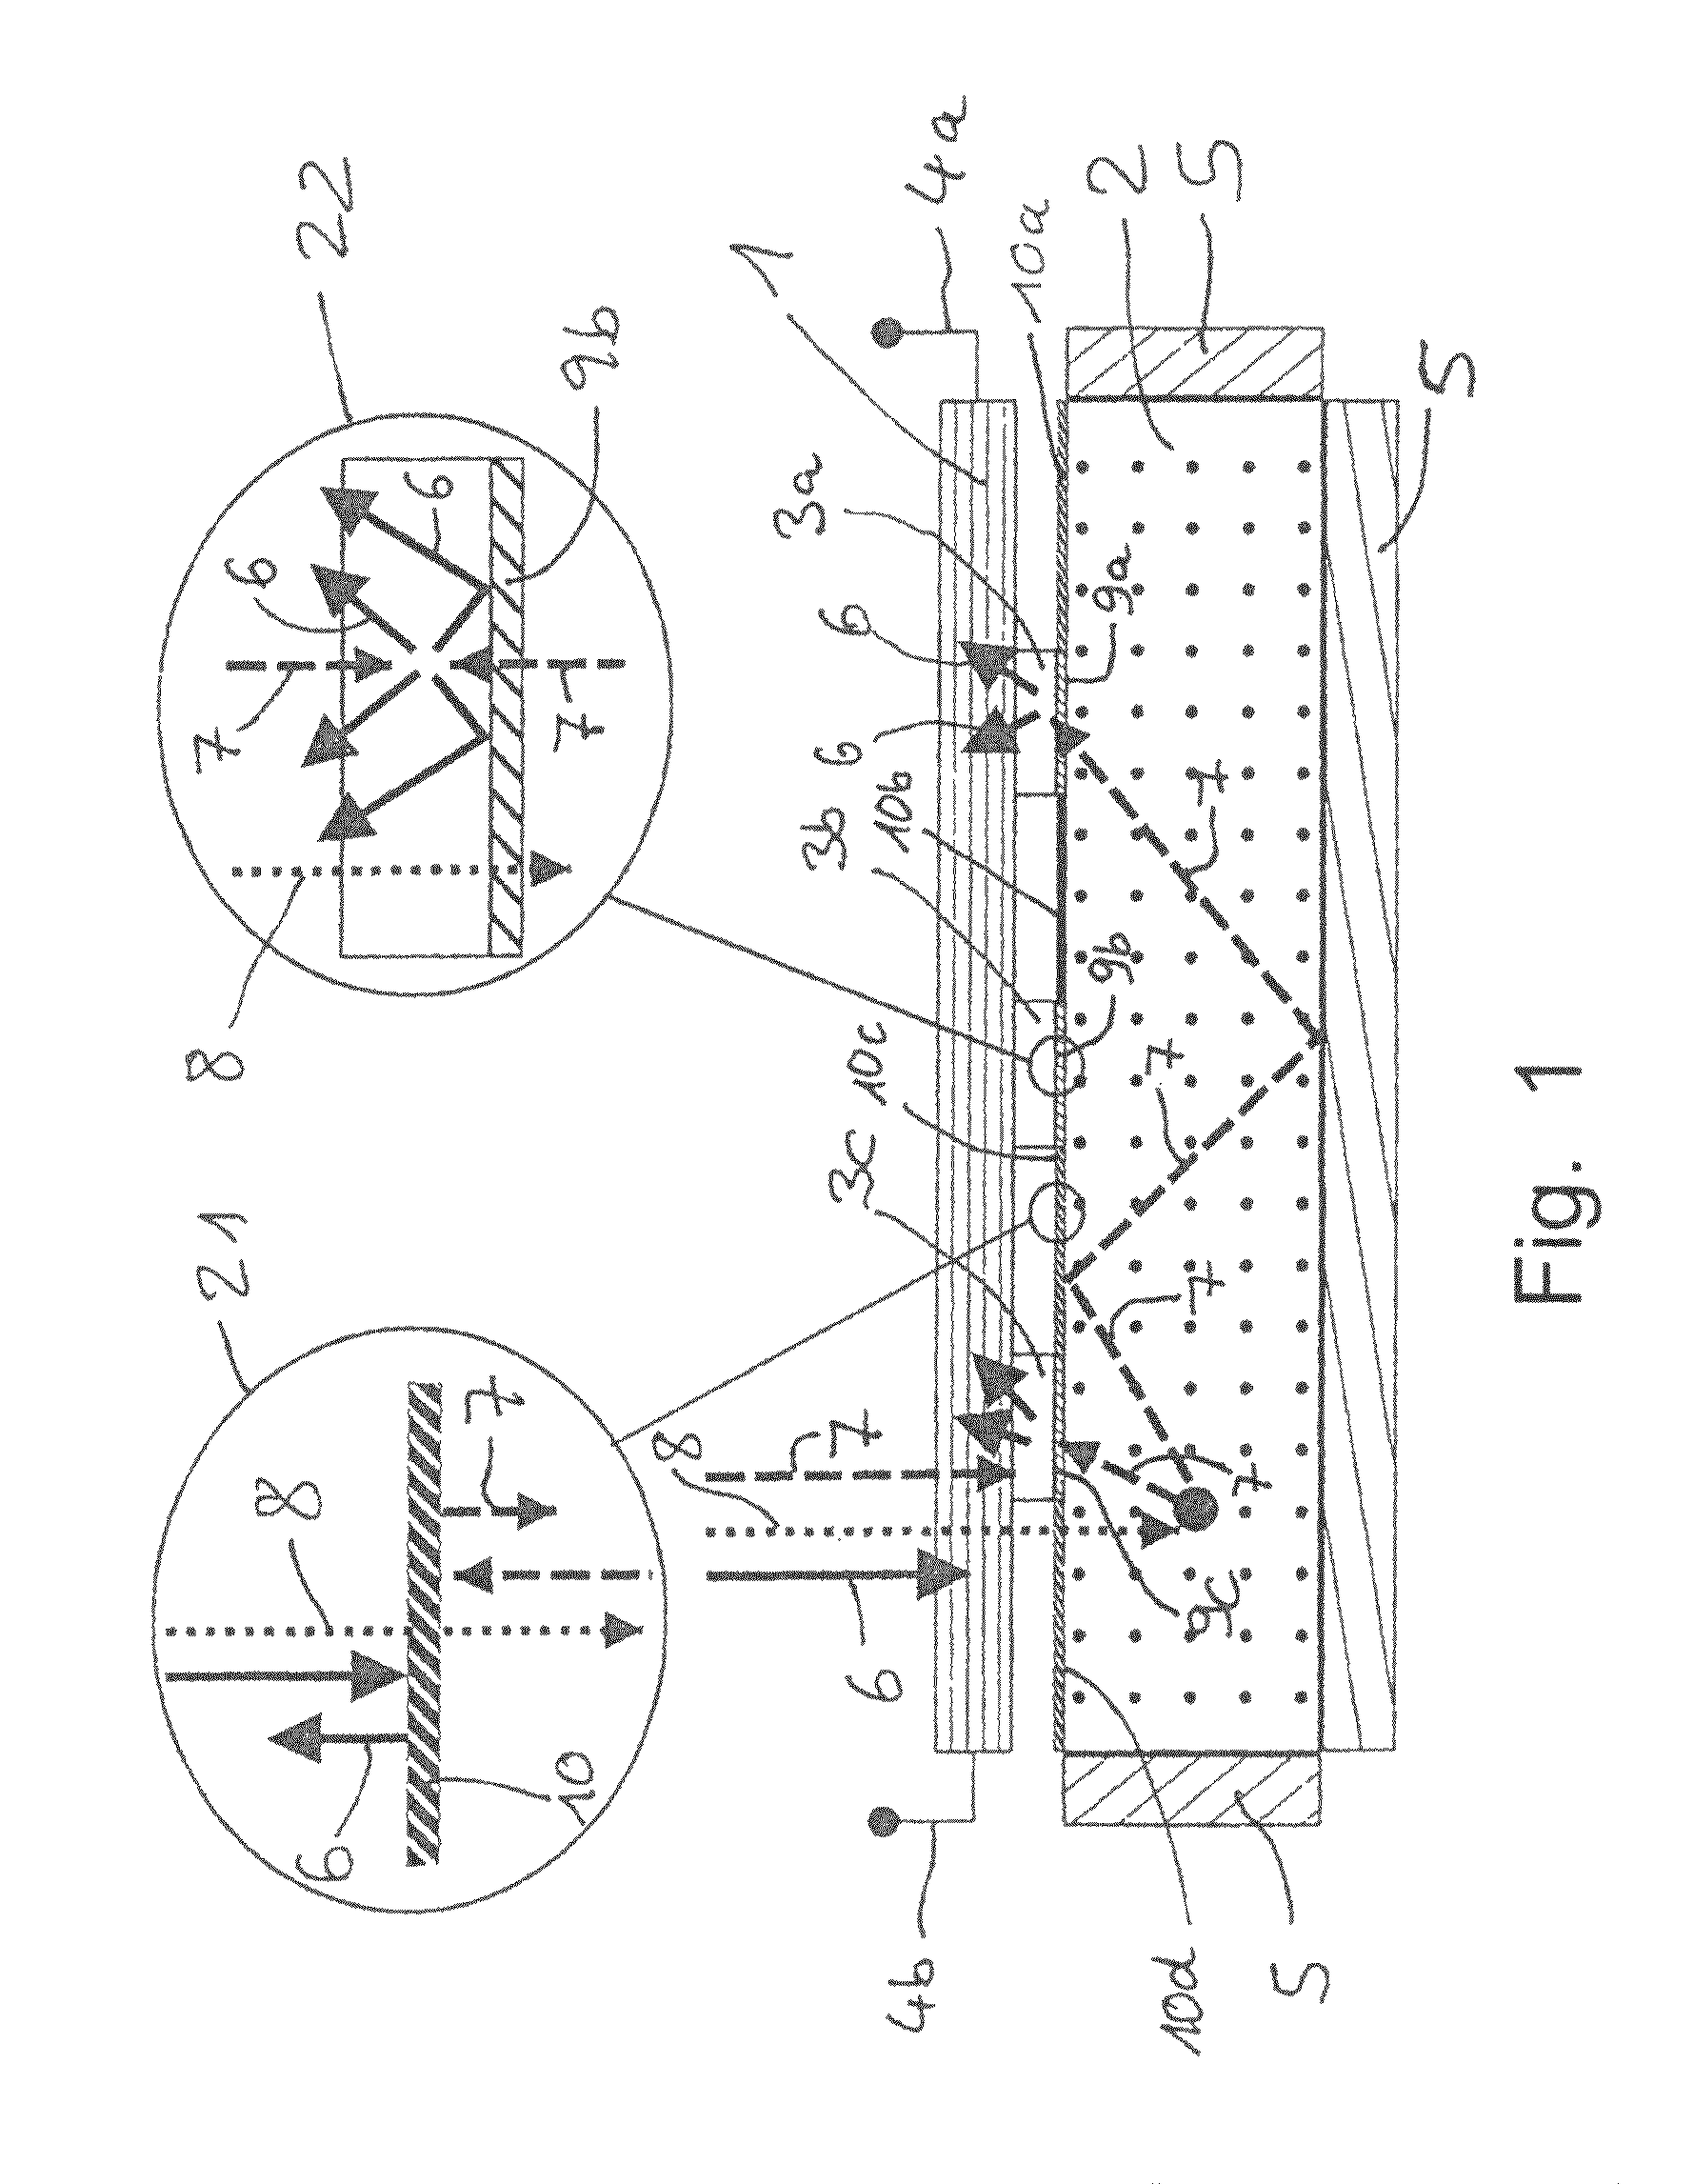 Solar element with increased efficiency and method for increasing efficiency